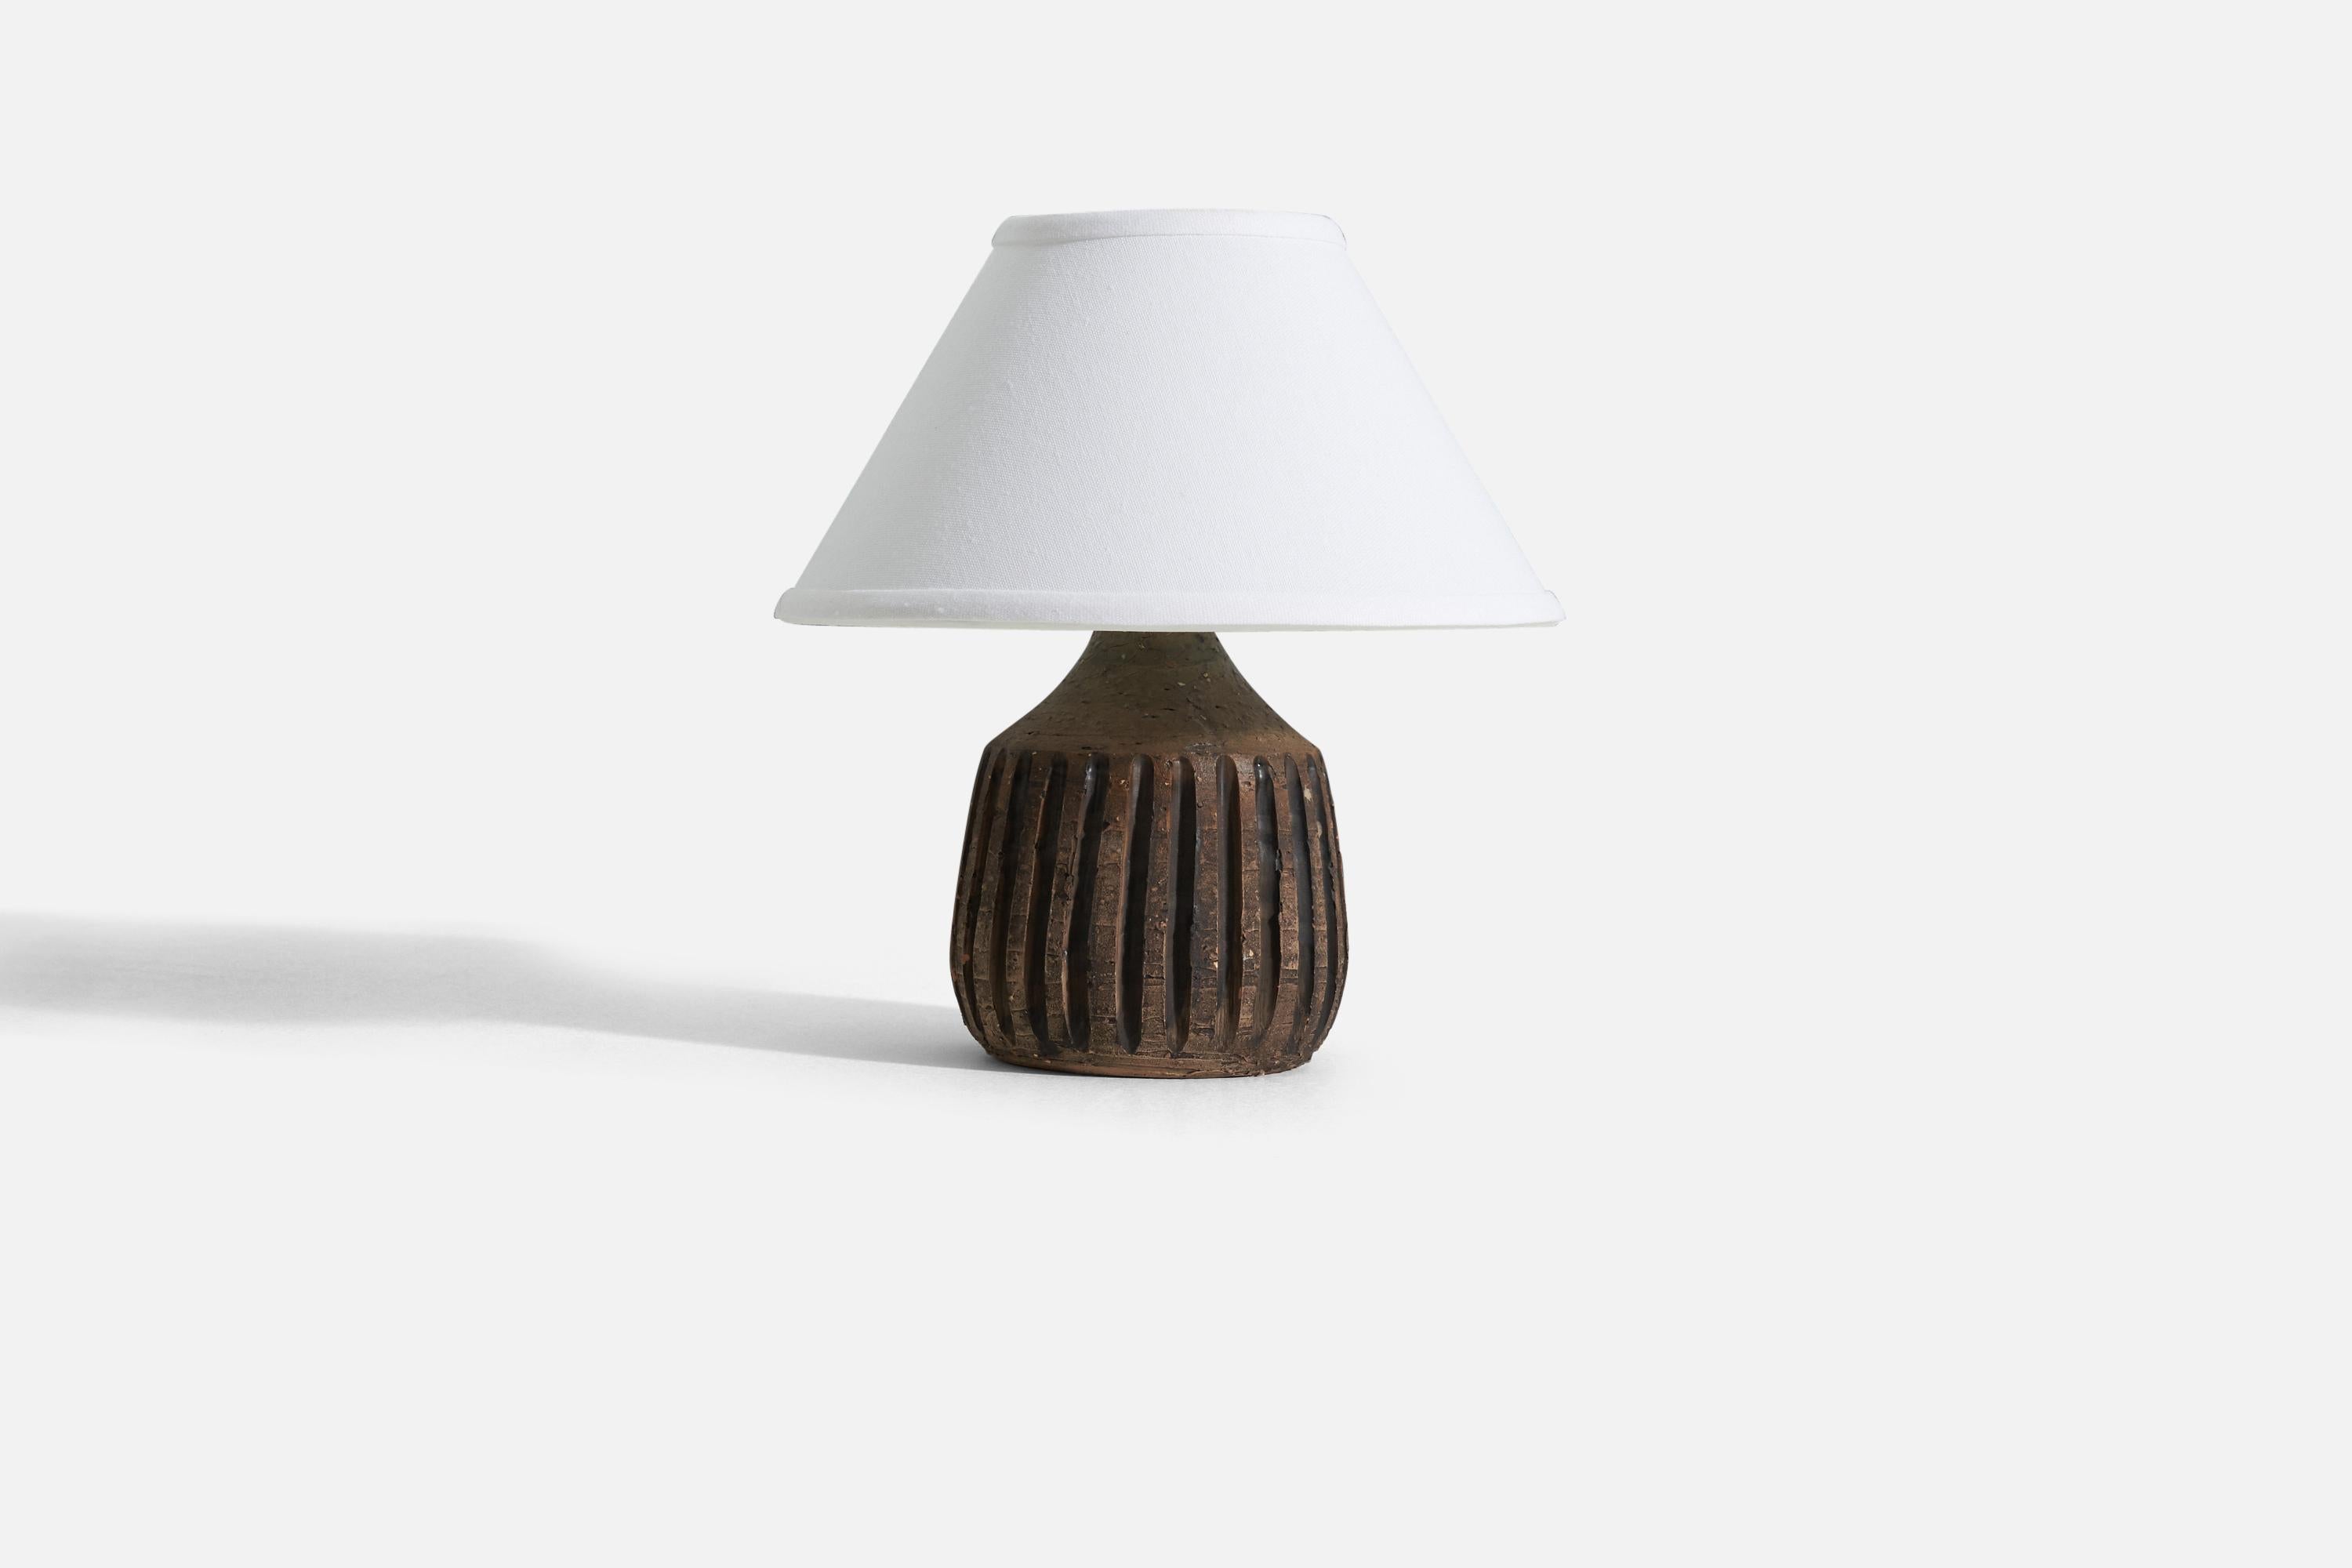 A brown-painted stoneware table lamp with fluted detailing, by Tilgmans Keramik, 1950s. 

Measurements listed are of the lamp itself. Sold without lampshade.
For reference:
Measurements of shade (inches) : 4.5 x 10.25 x 6 (T x B x S)
Overall